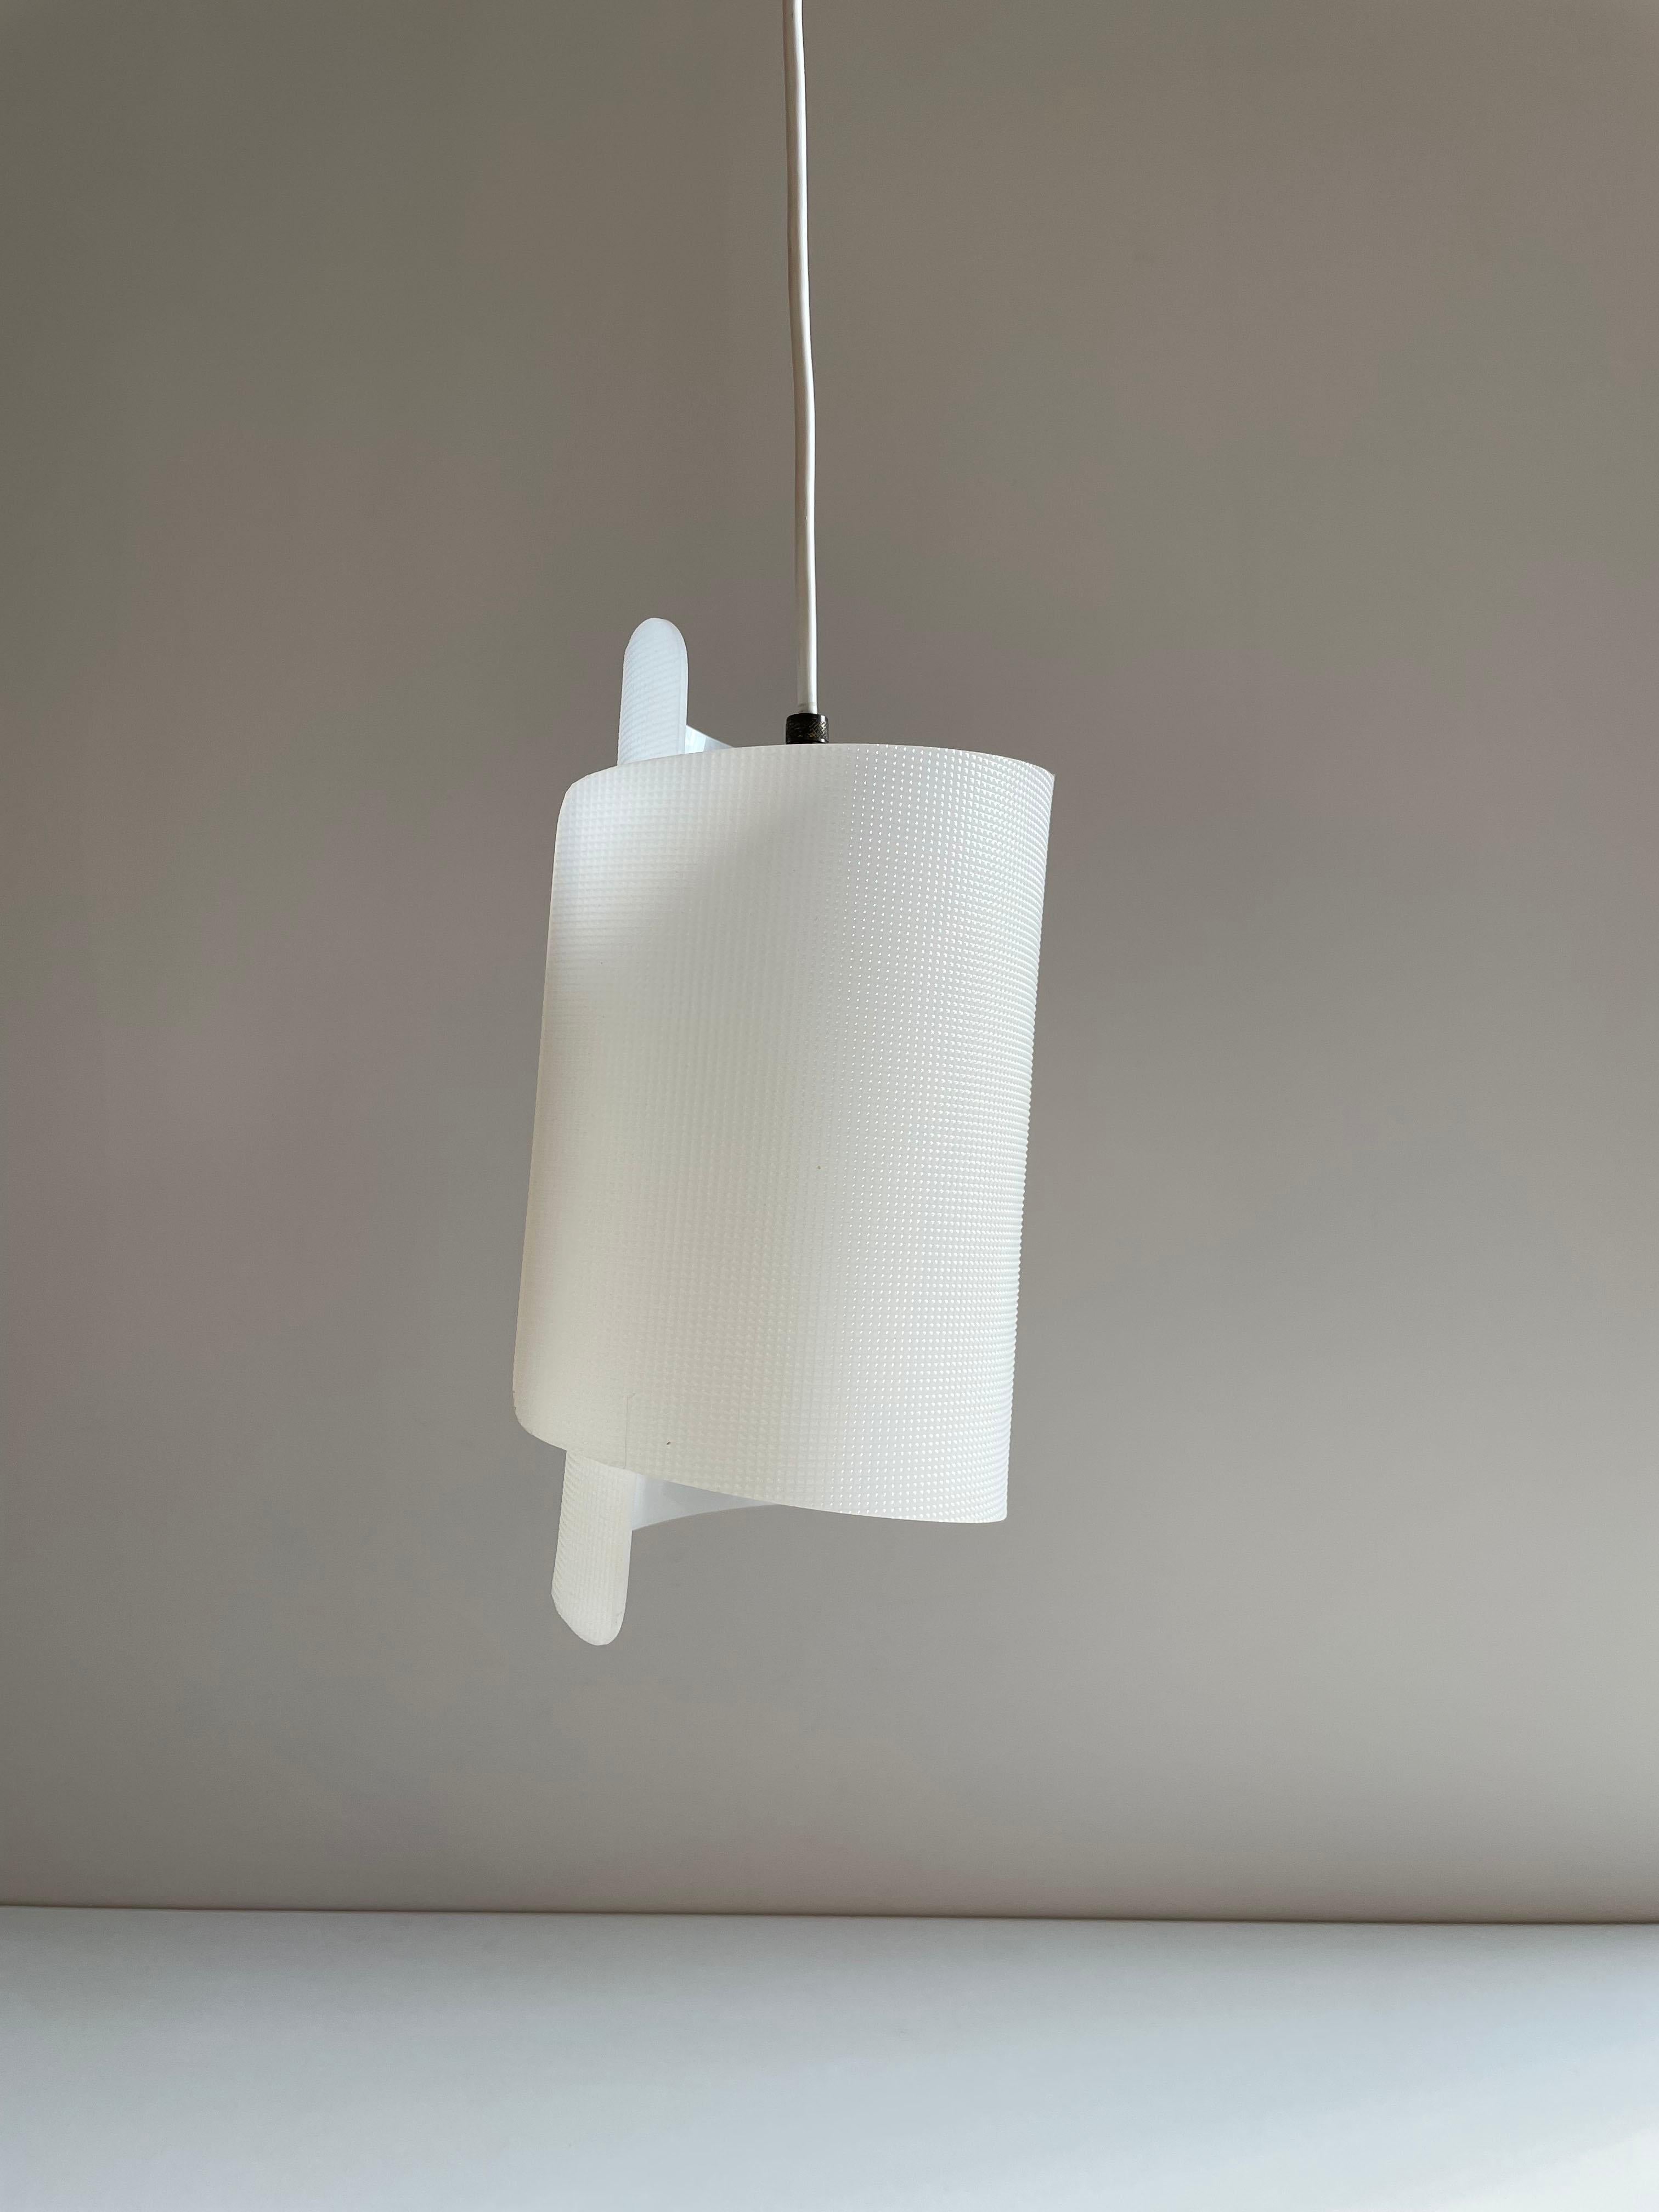 Very stylish small size mid-century pendant lamp attributed to Austrian company Nikoll

The lampshade is made of textured white acrylic, with discrete details in brass

1xE27 lamp socket

Dimensions of the lampshade: 26.5 x 14.5 x 13 cm (H/W/D)
The